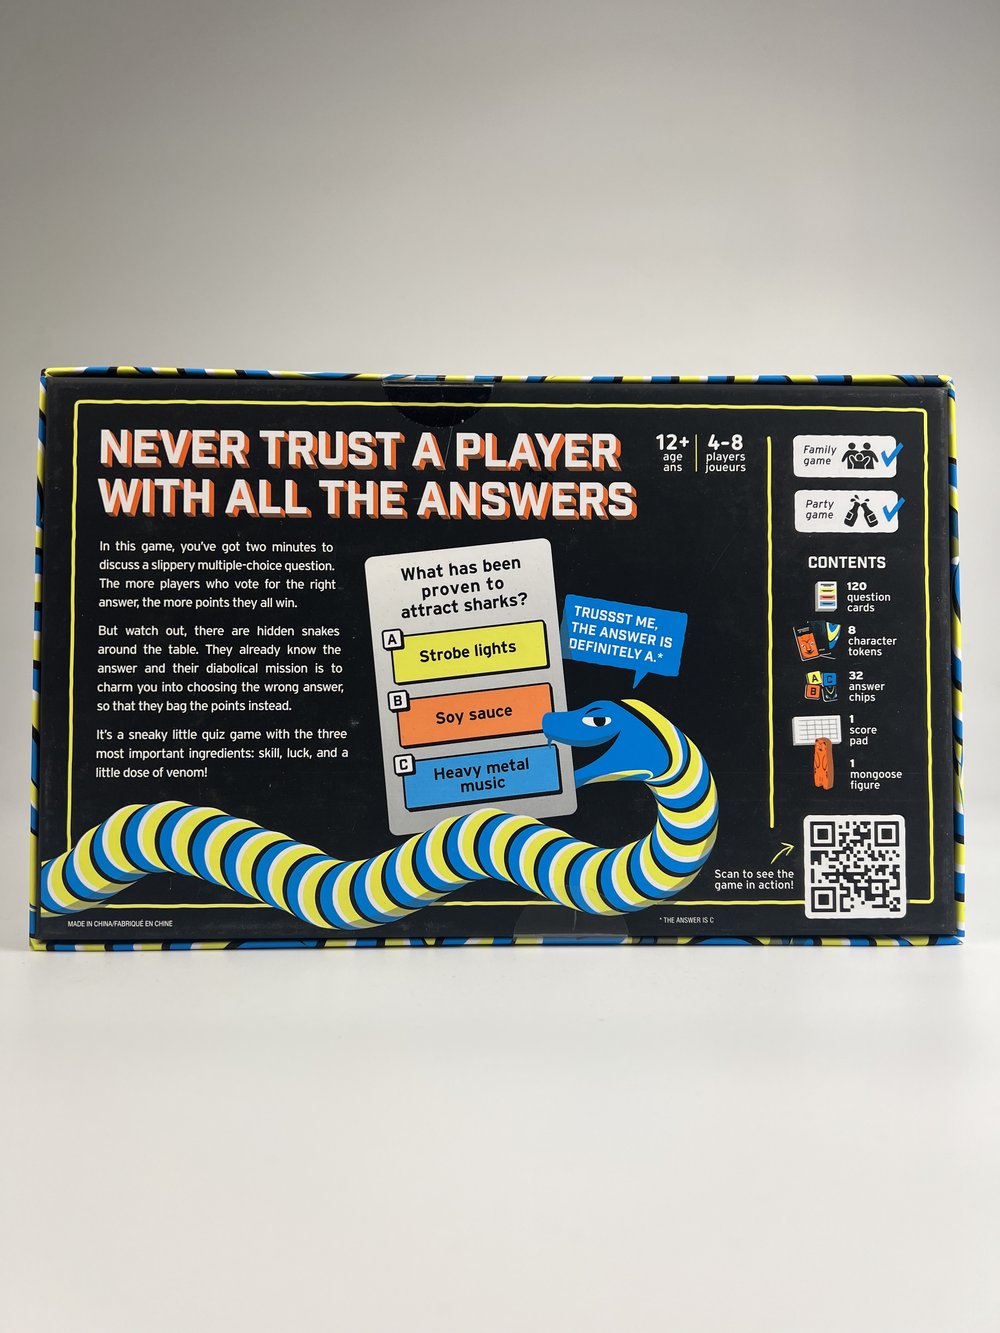 Snakesss Social Deduction Strategy Card Board Game, for Familes, Adults and  Kids